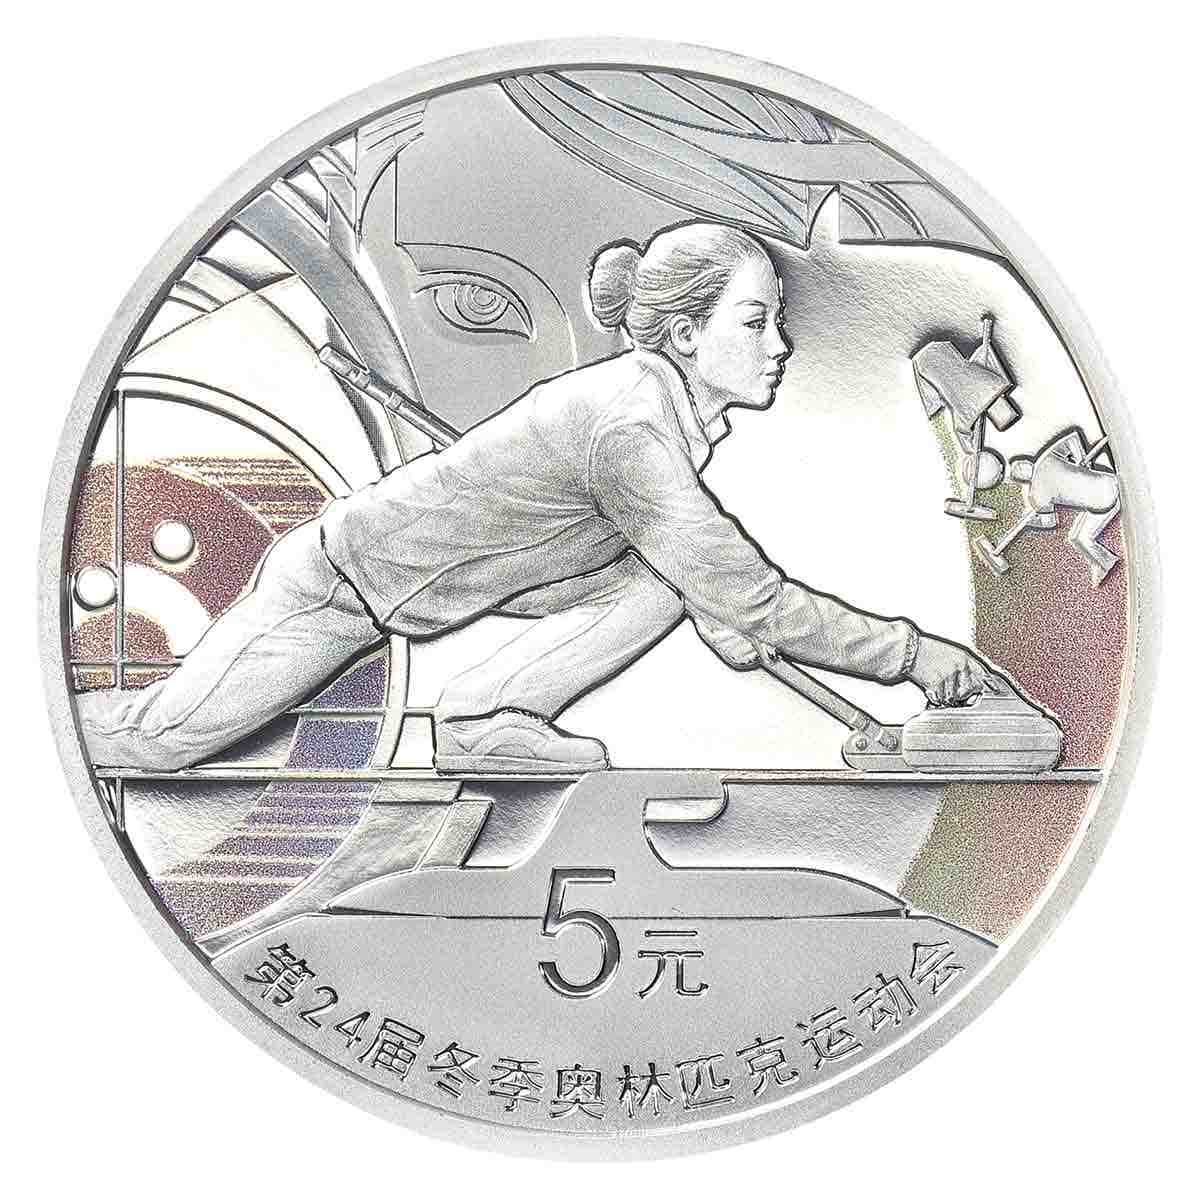 Olympic Winter Games Beijing 2022 Gold and Silver 6-Coin Proof Set